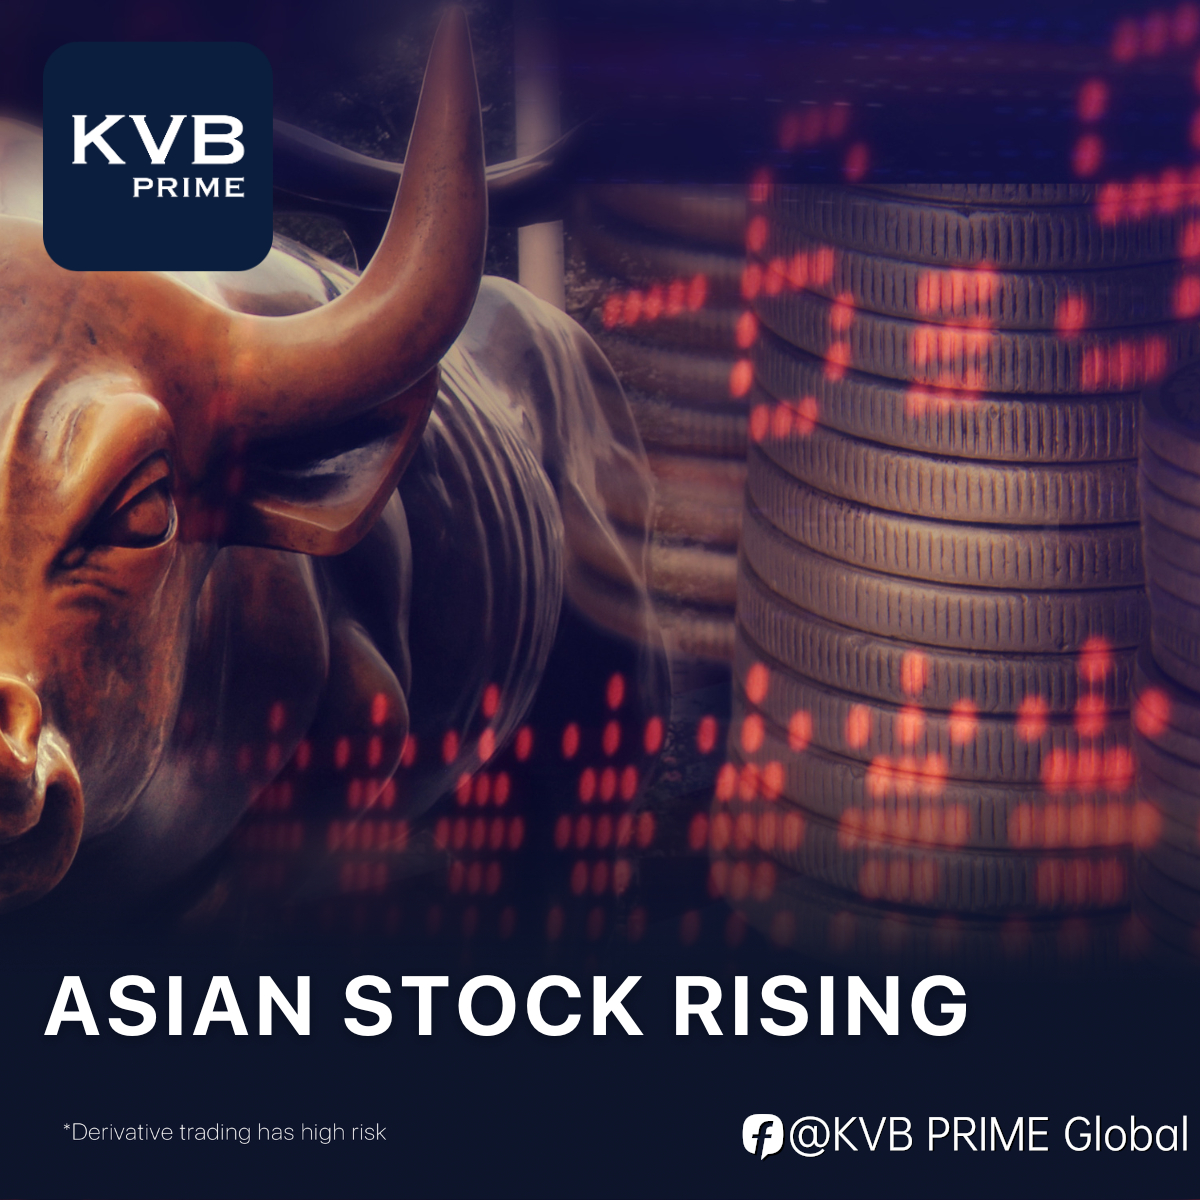 Asian stock markets are rising